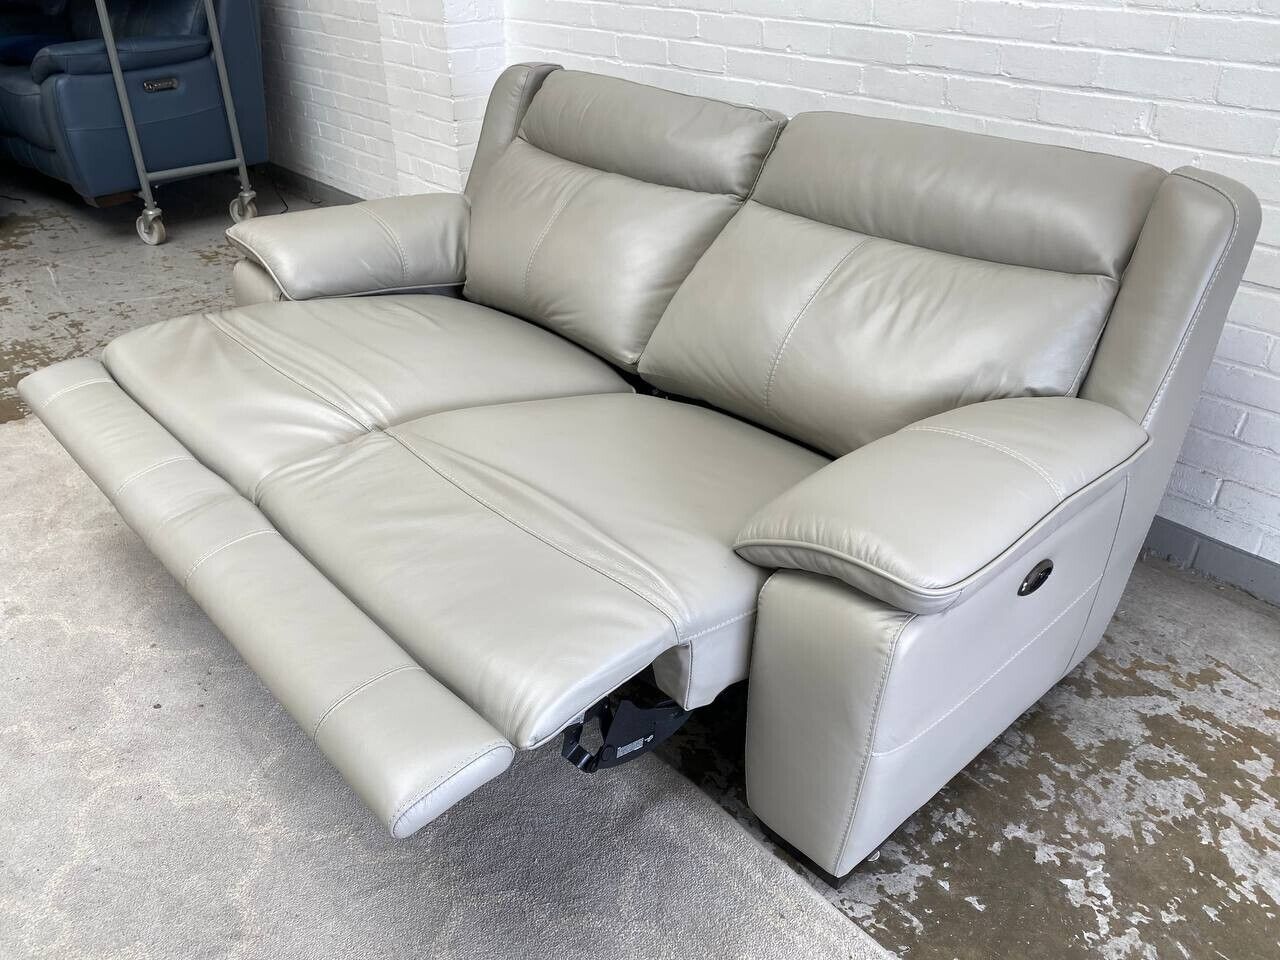 World of Leather Starlight Express 3 Seater